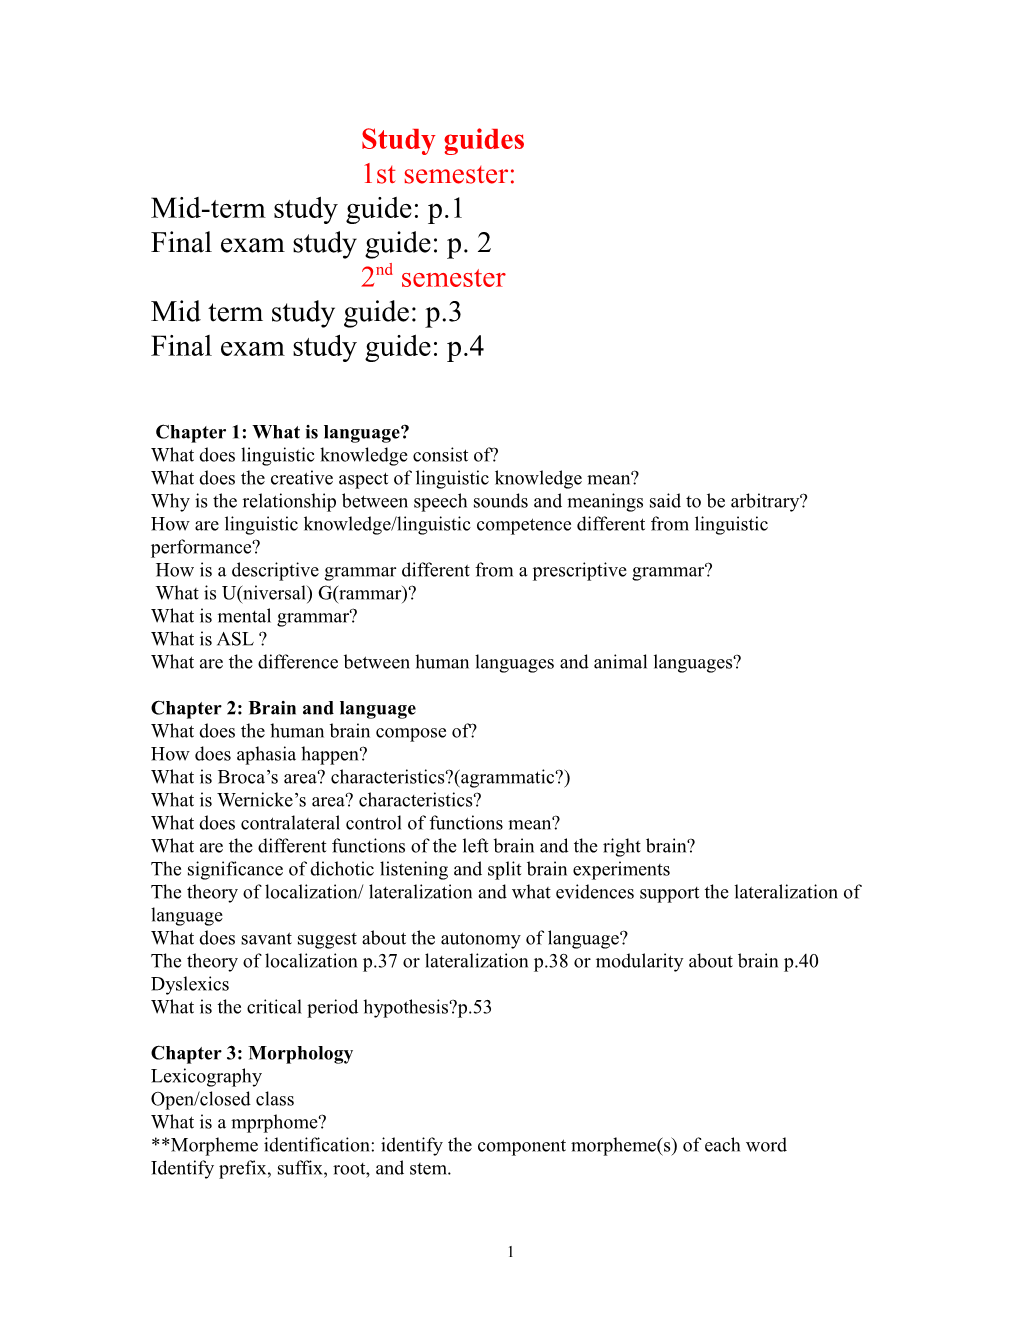 Mid-Term Study Guide: P.1